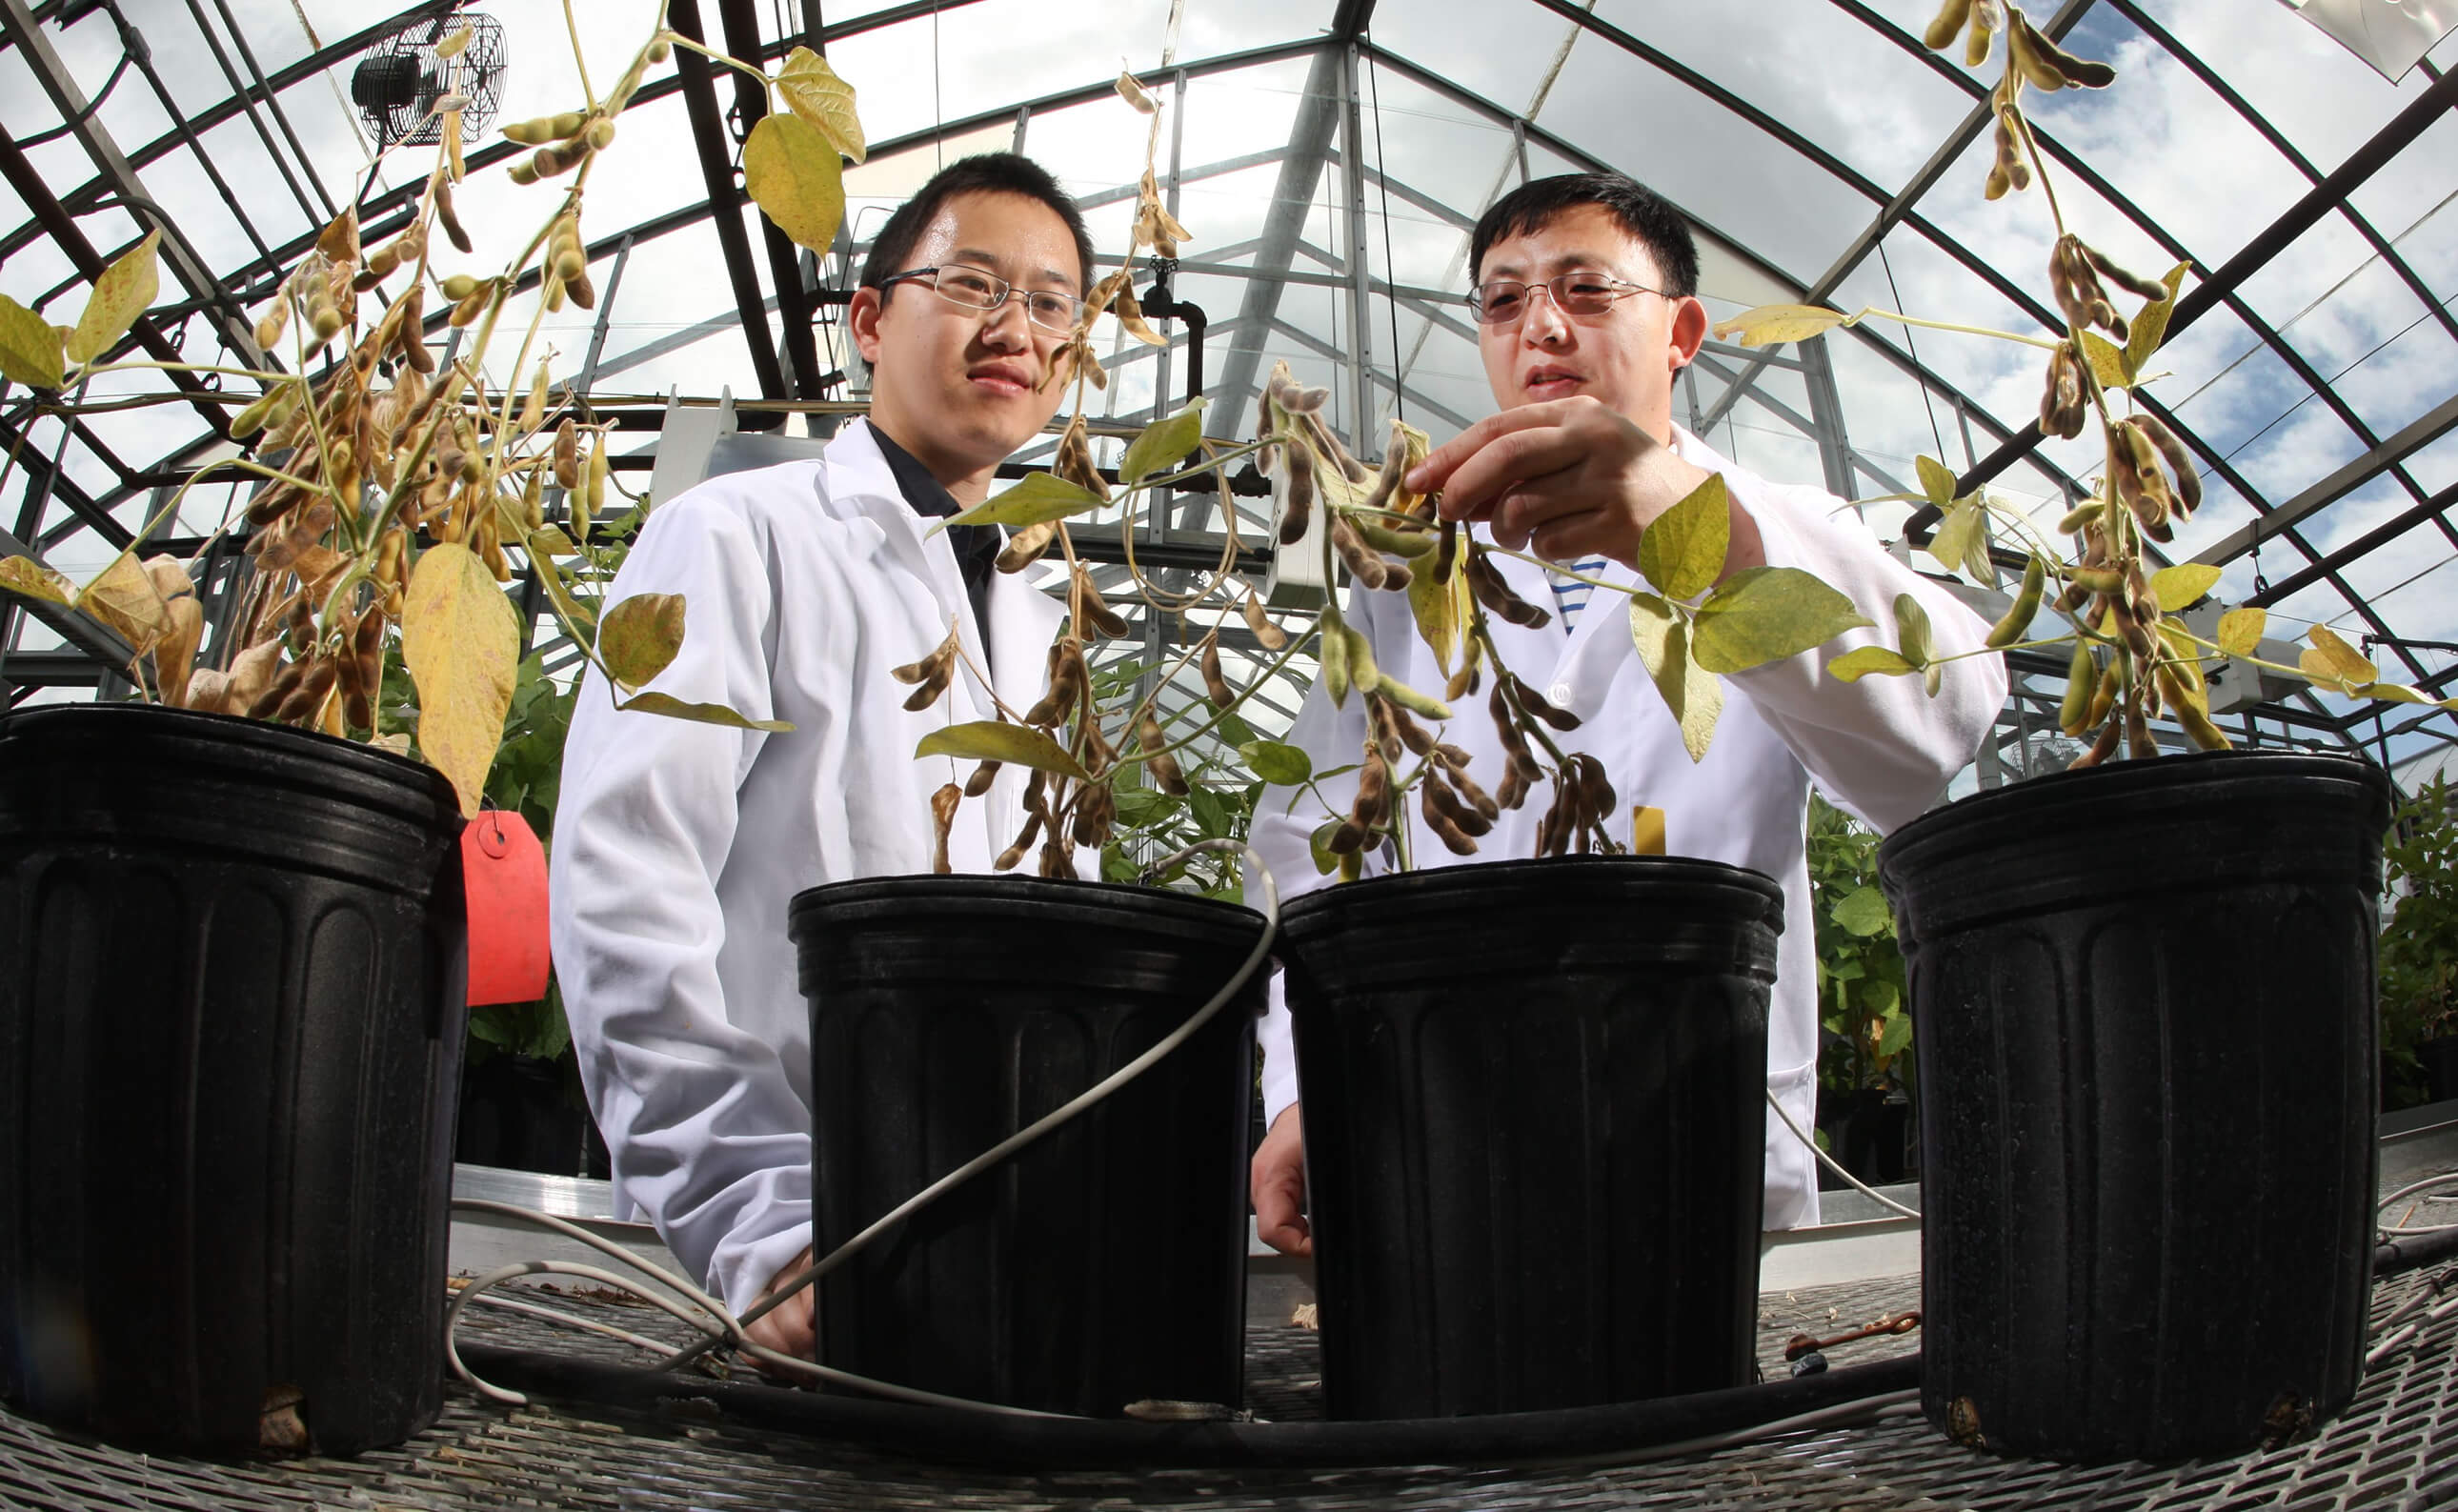 In this 2014 photo, Doctoral student Jieqing Ping, at left, and agronomy professor Jianxin Ma examine soybean stem architecture in a greenhouse at Purdue. Dr. Ping is currently a Senior Scientist at BASF. 